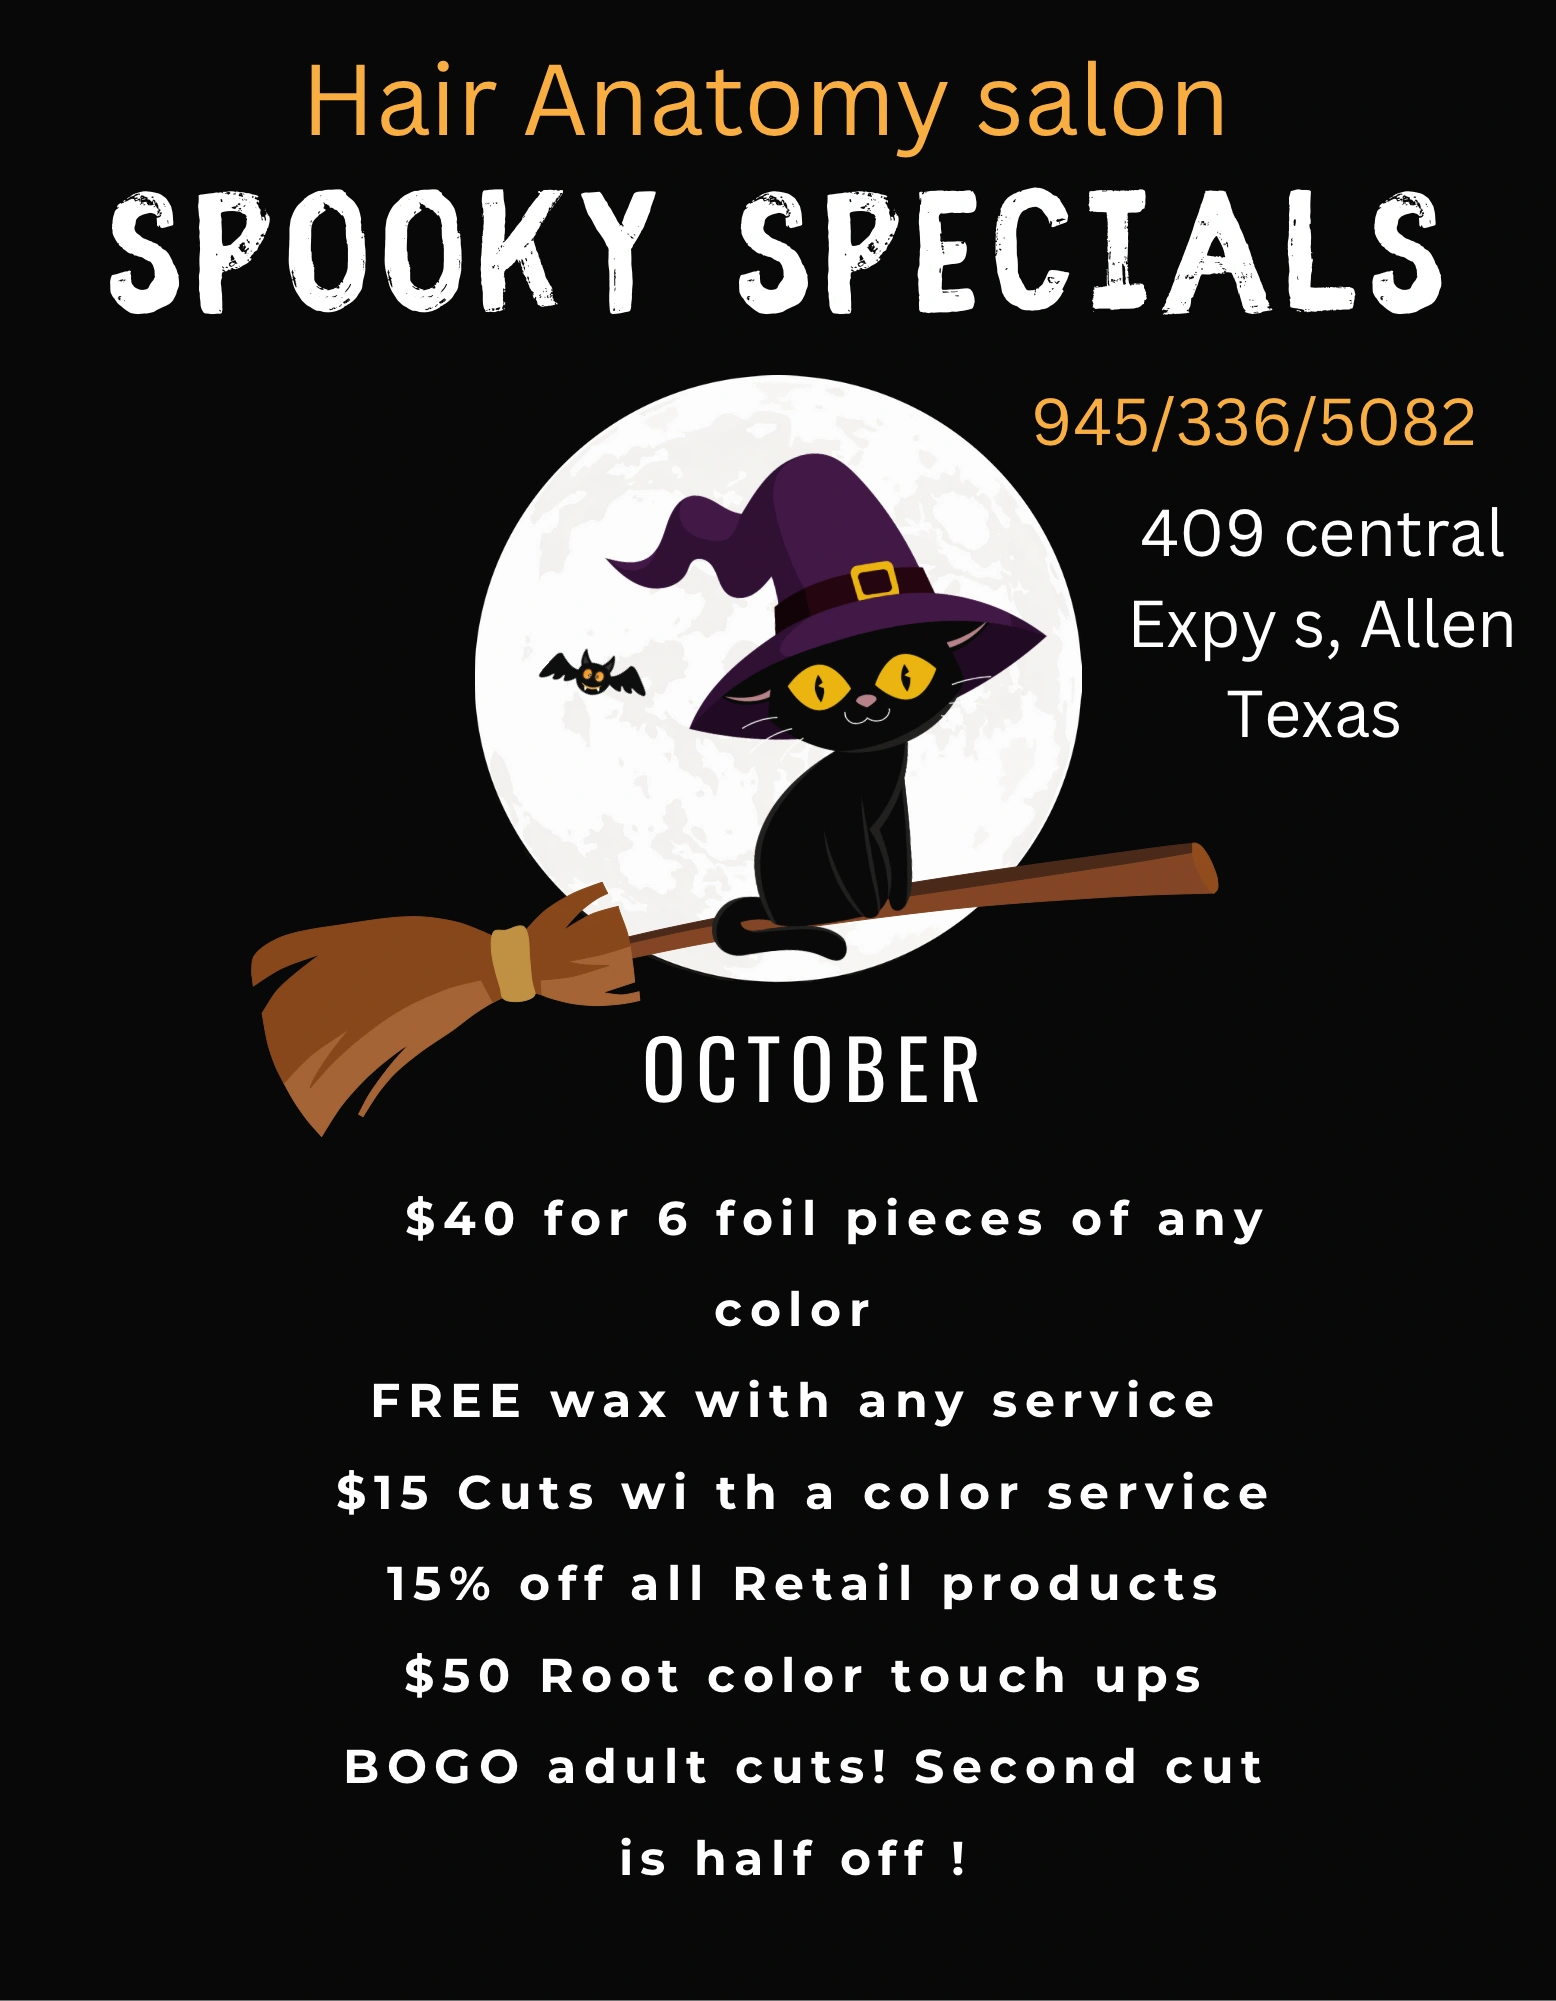 🎃October specials ! 👻

🚨REMINDER- I will be closed 21st-26th Plan accordingly ! 🚨

BOGO cuts! Br